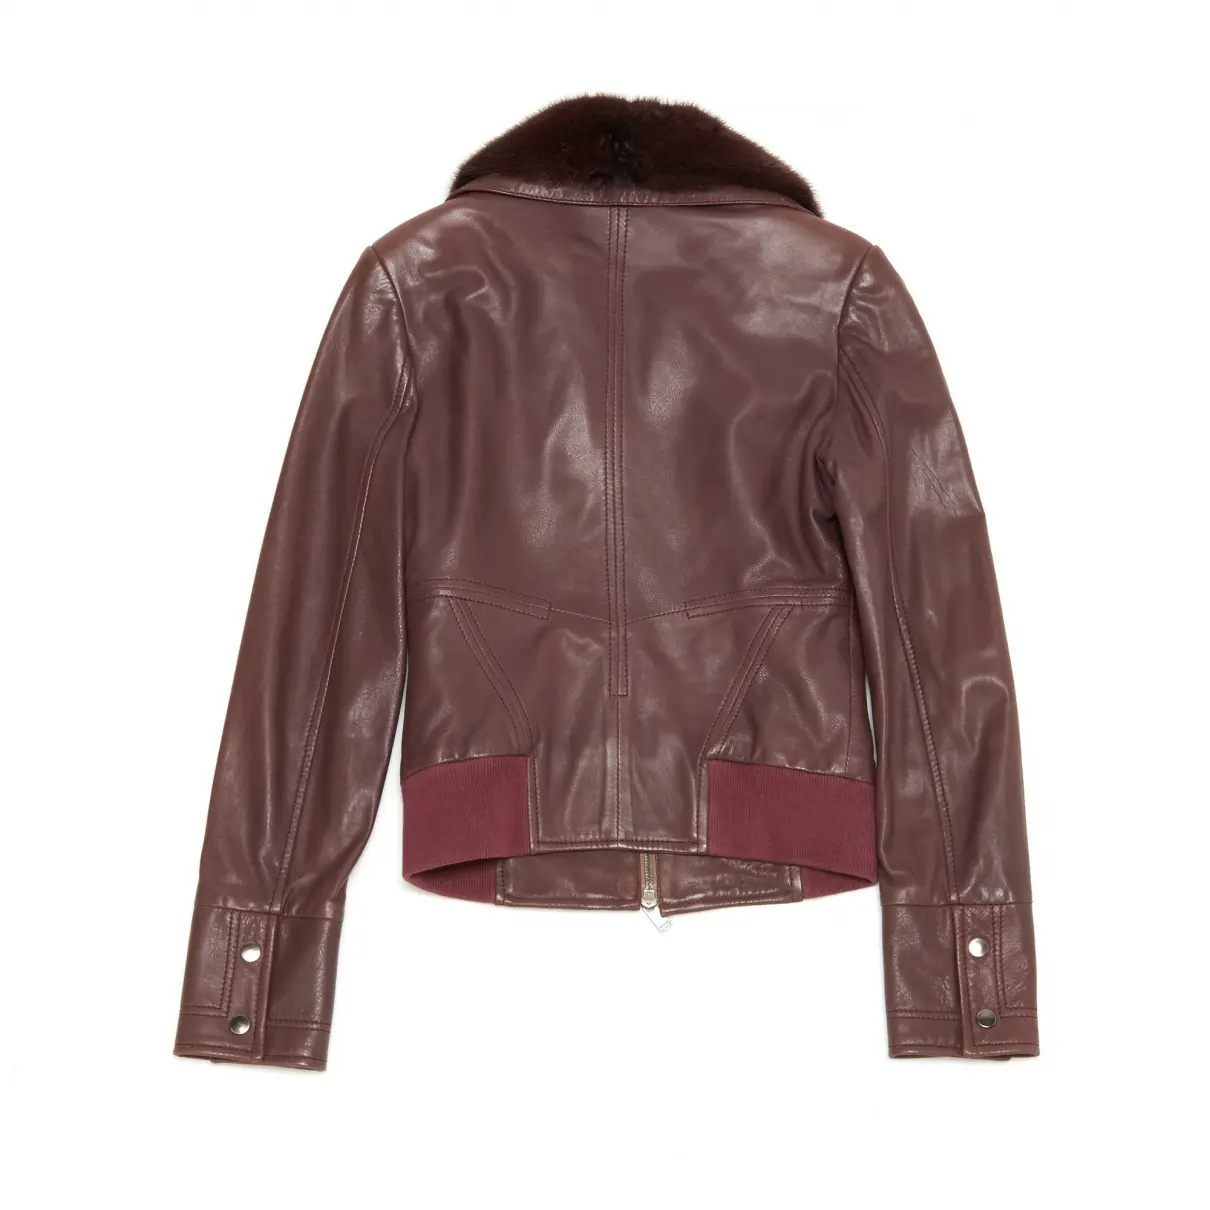 Jitrois Leather jacket for sale